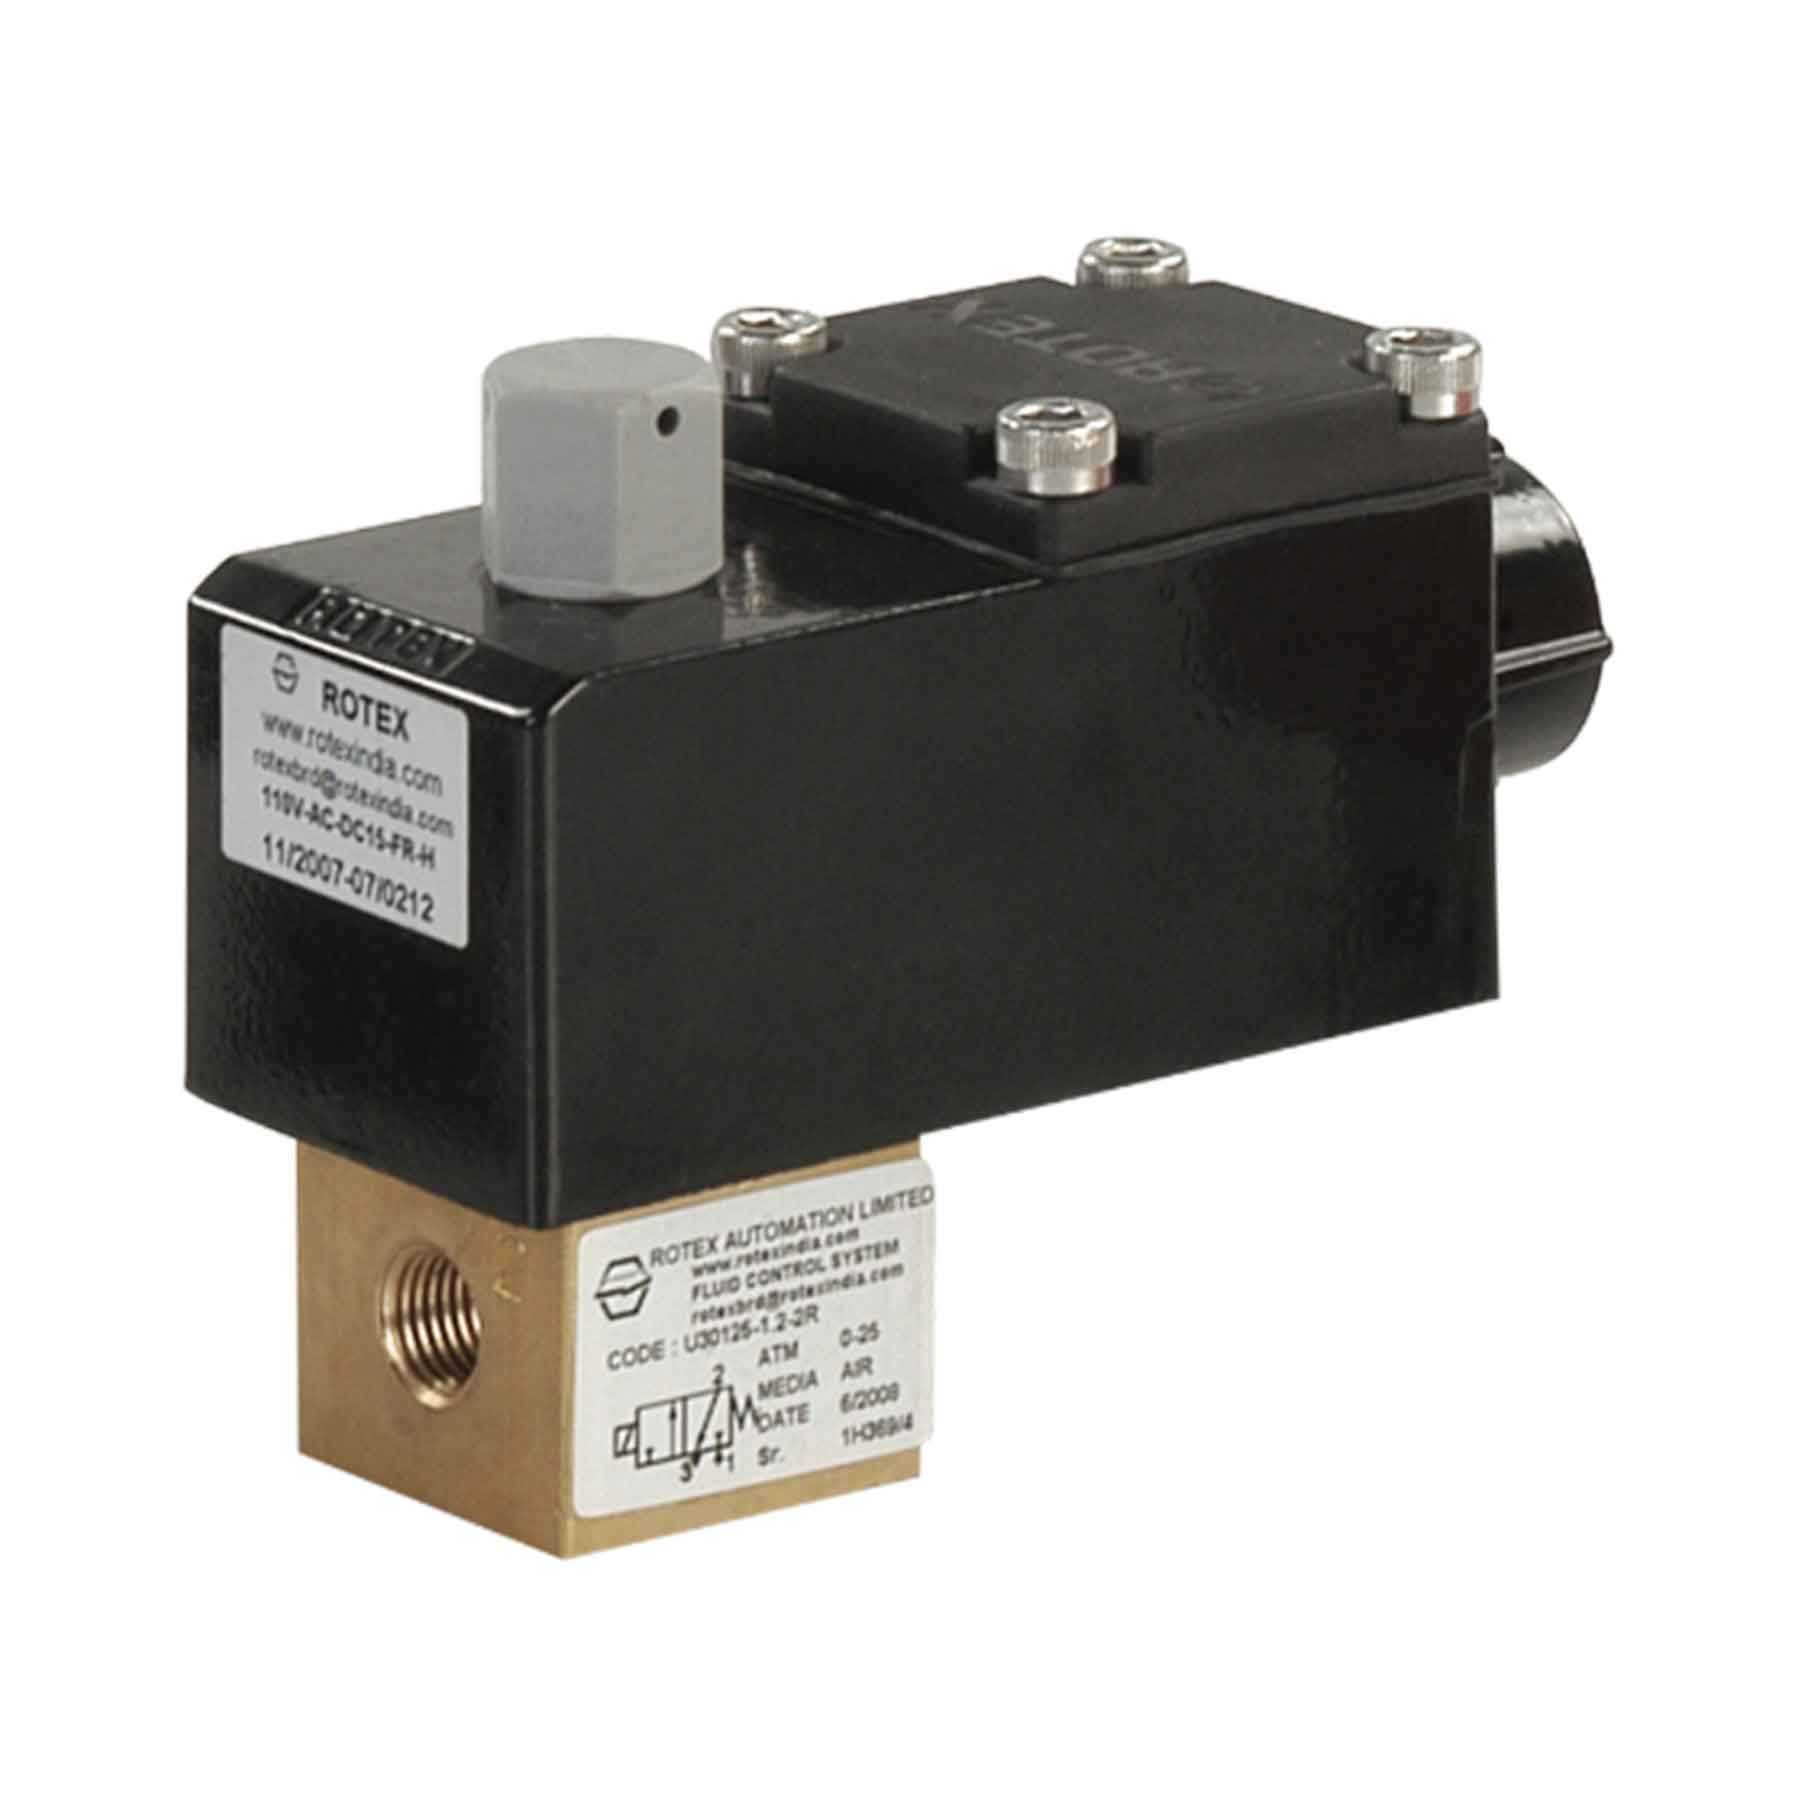 Rotex 2/2-Way Normally Closed Direct Lift Solenoid Valve 20101-AM-4-2G-B5-S1-AMONIA+III-24V-DC-39-H-01